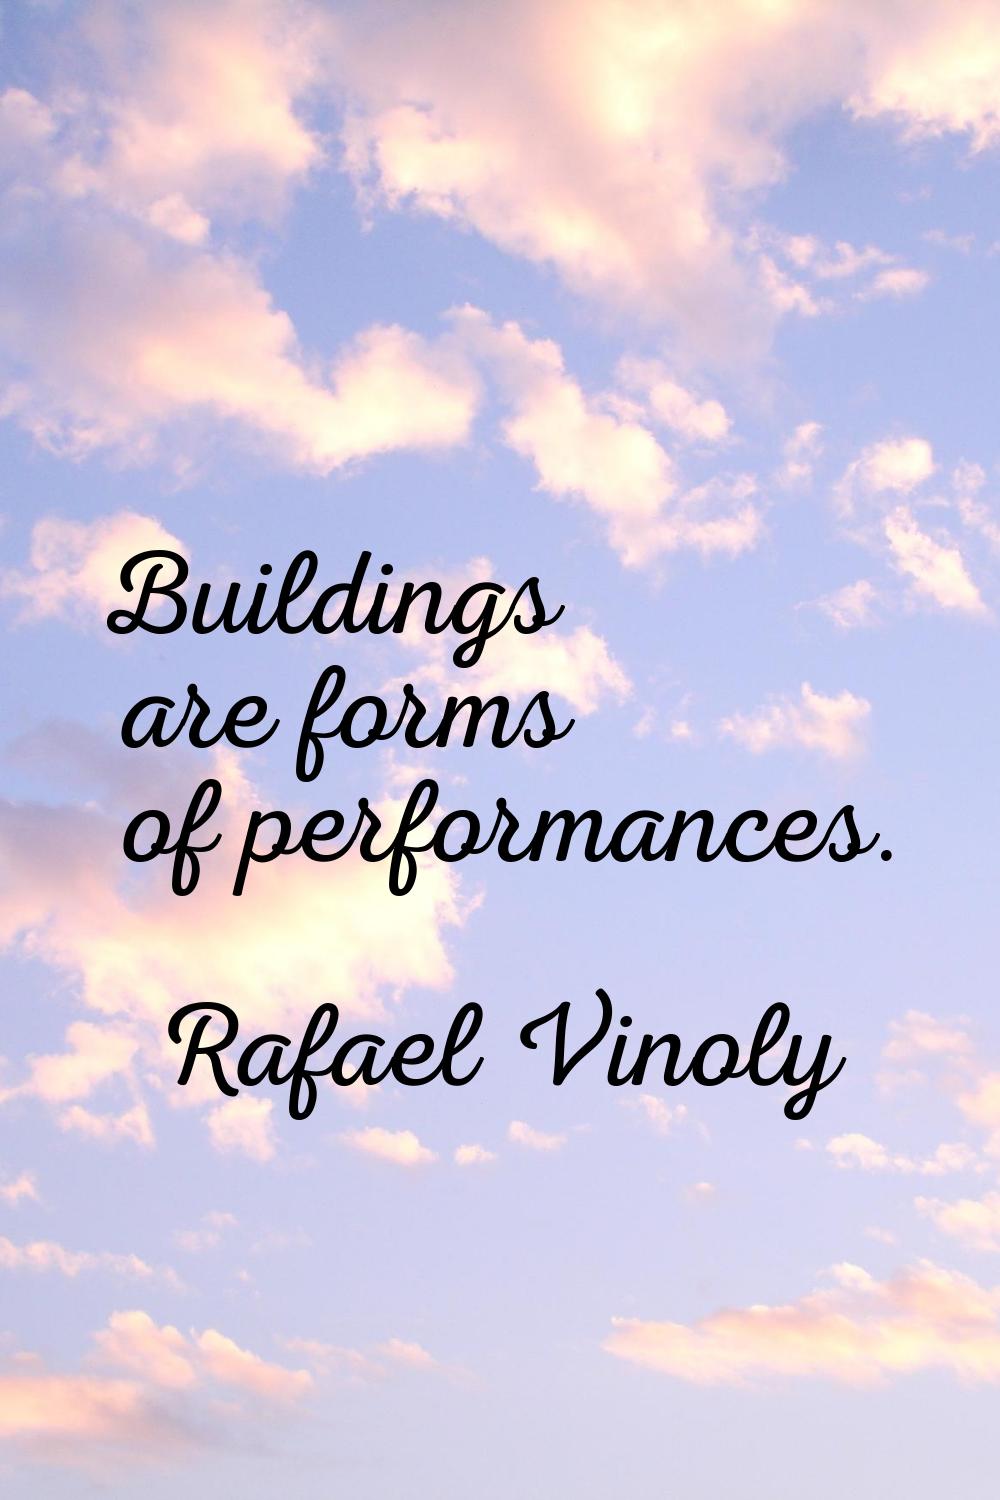 Buildings are forms of performances.